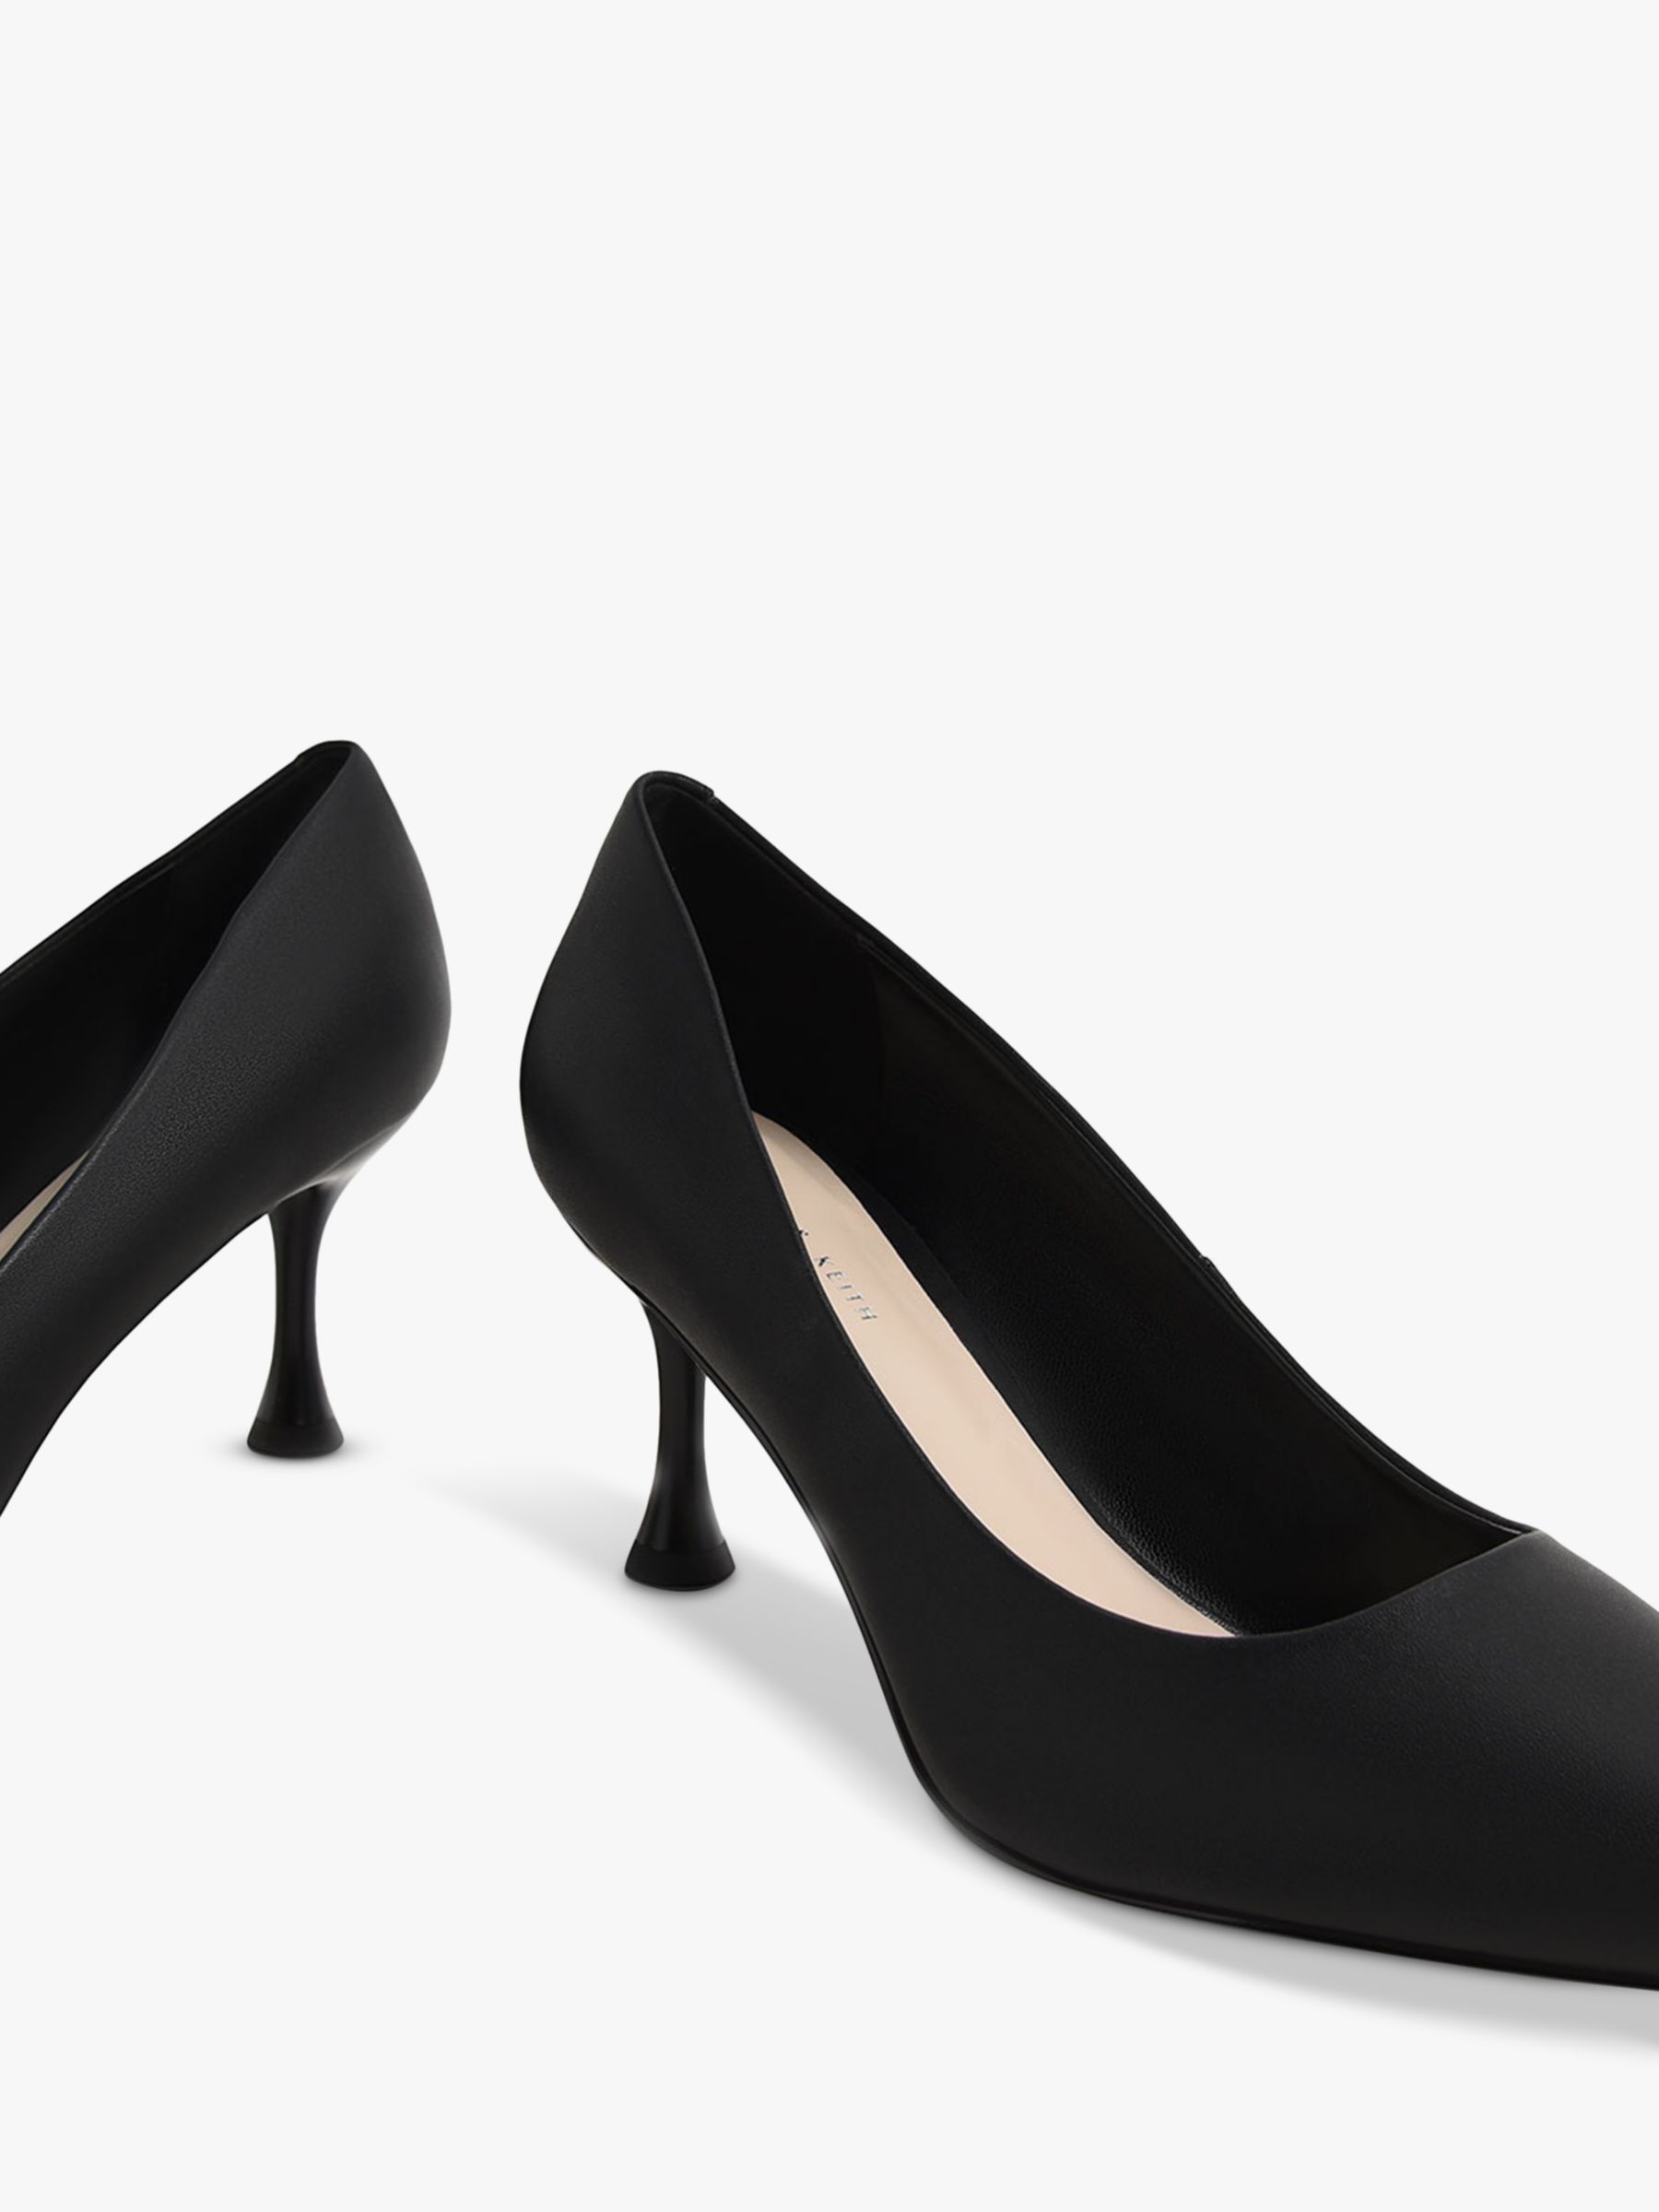 Buy CHARLES & KEITH Spool Heel Court Shoes Online at johnlewis.com